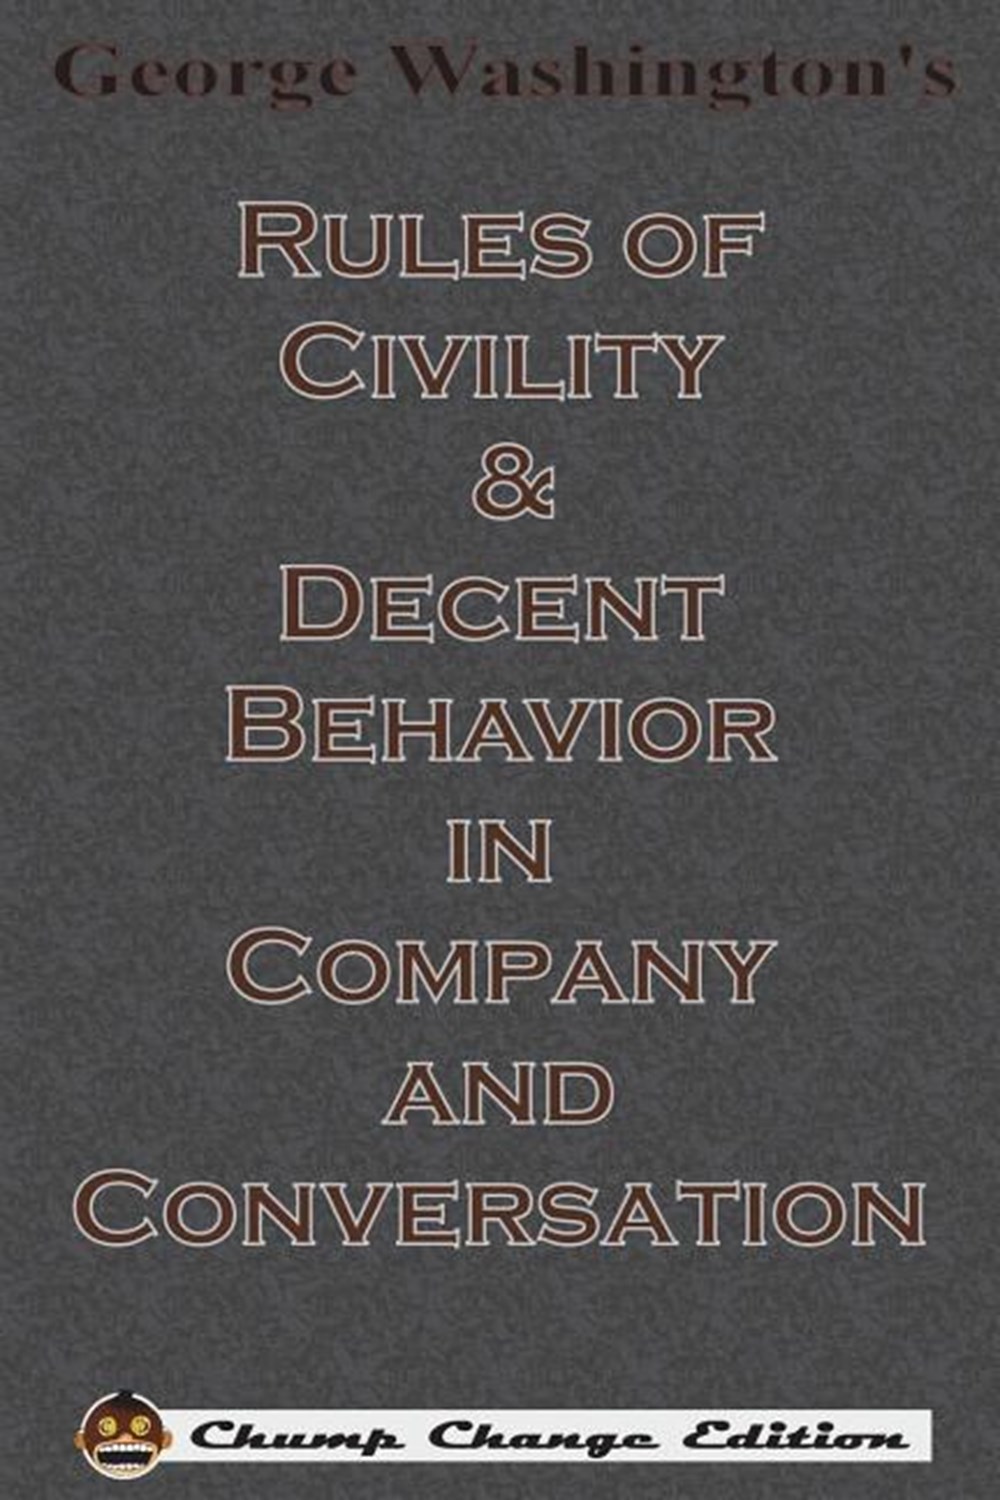 George Washington's Rules of Civility & Decent Behavior in Company and Conversation (Chump Change Ed